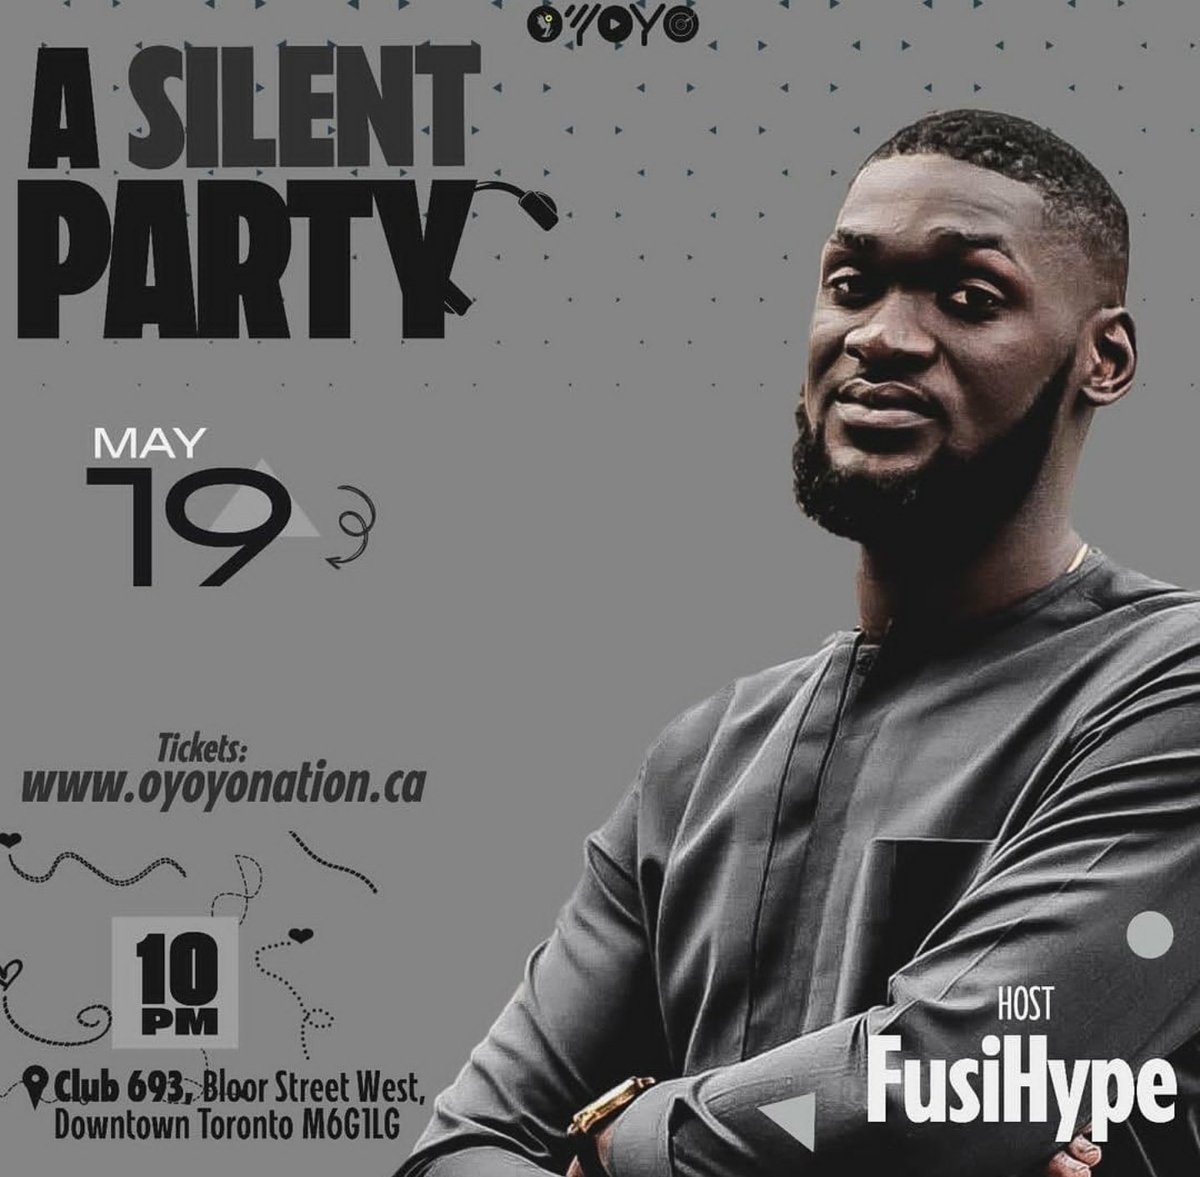 Y'ALL BETTER START BELIEVING THE HYPE 🎤🗣. IF YOU IN TORONTO PULL UP OR YOU KNOW SOMEONE IN TORONTO TELL EM TO PULL UP. @a_fusigboye on this one...
#Believethehype 💯